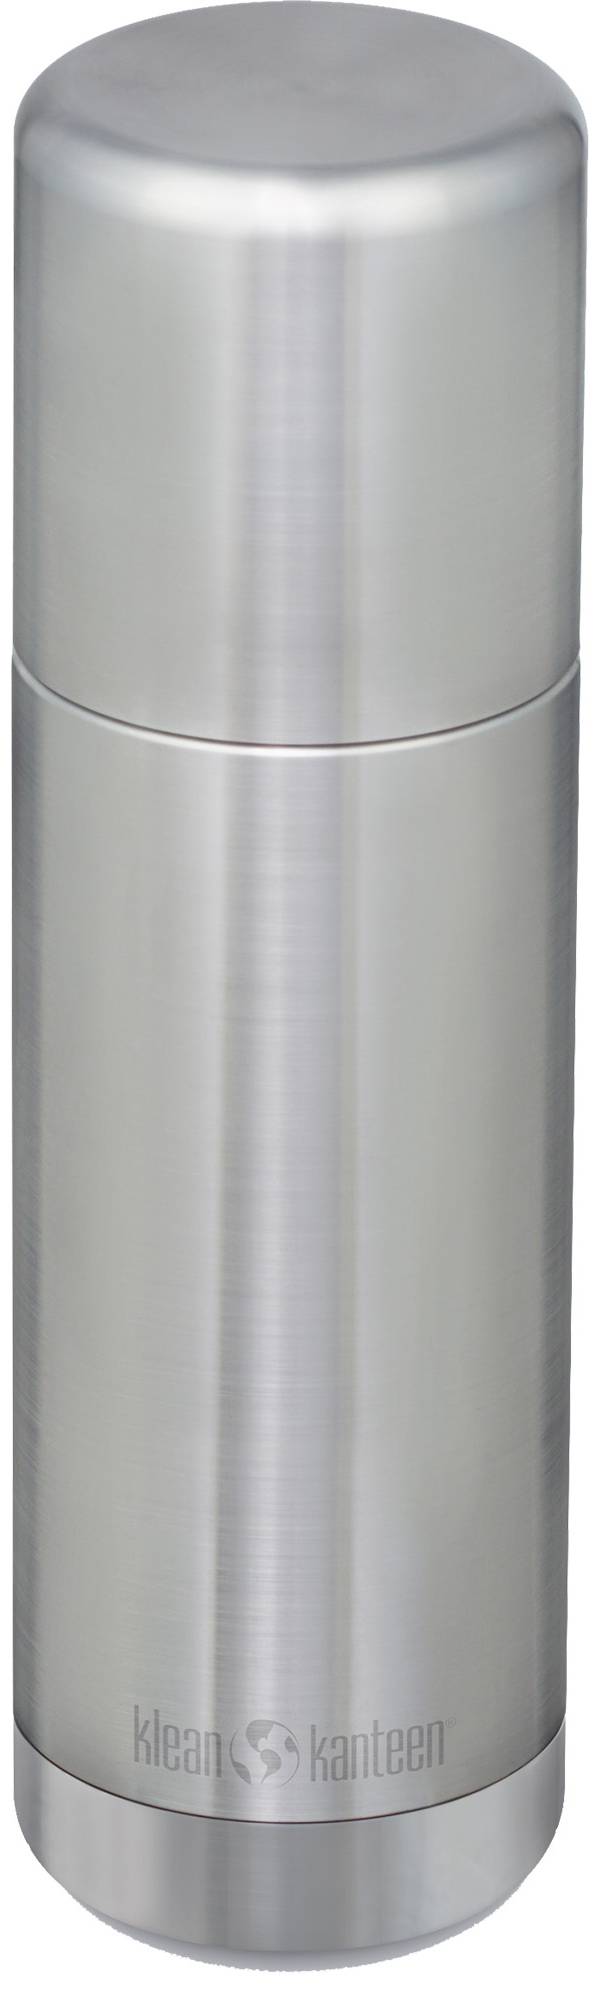 Klean Kanteen 16 oz. TKPro Insulated Thermos product image